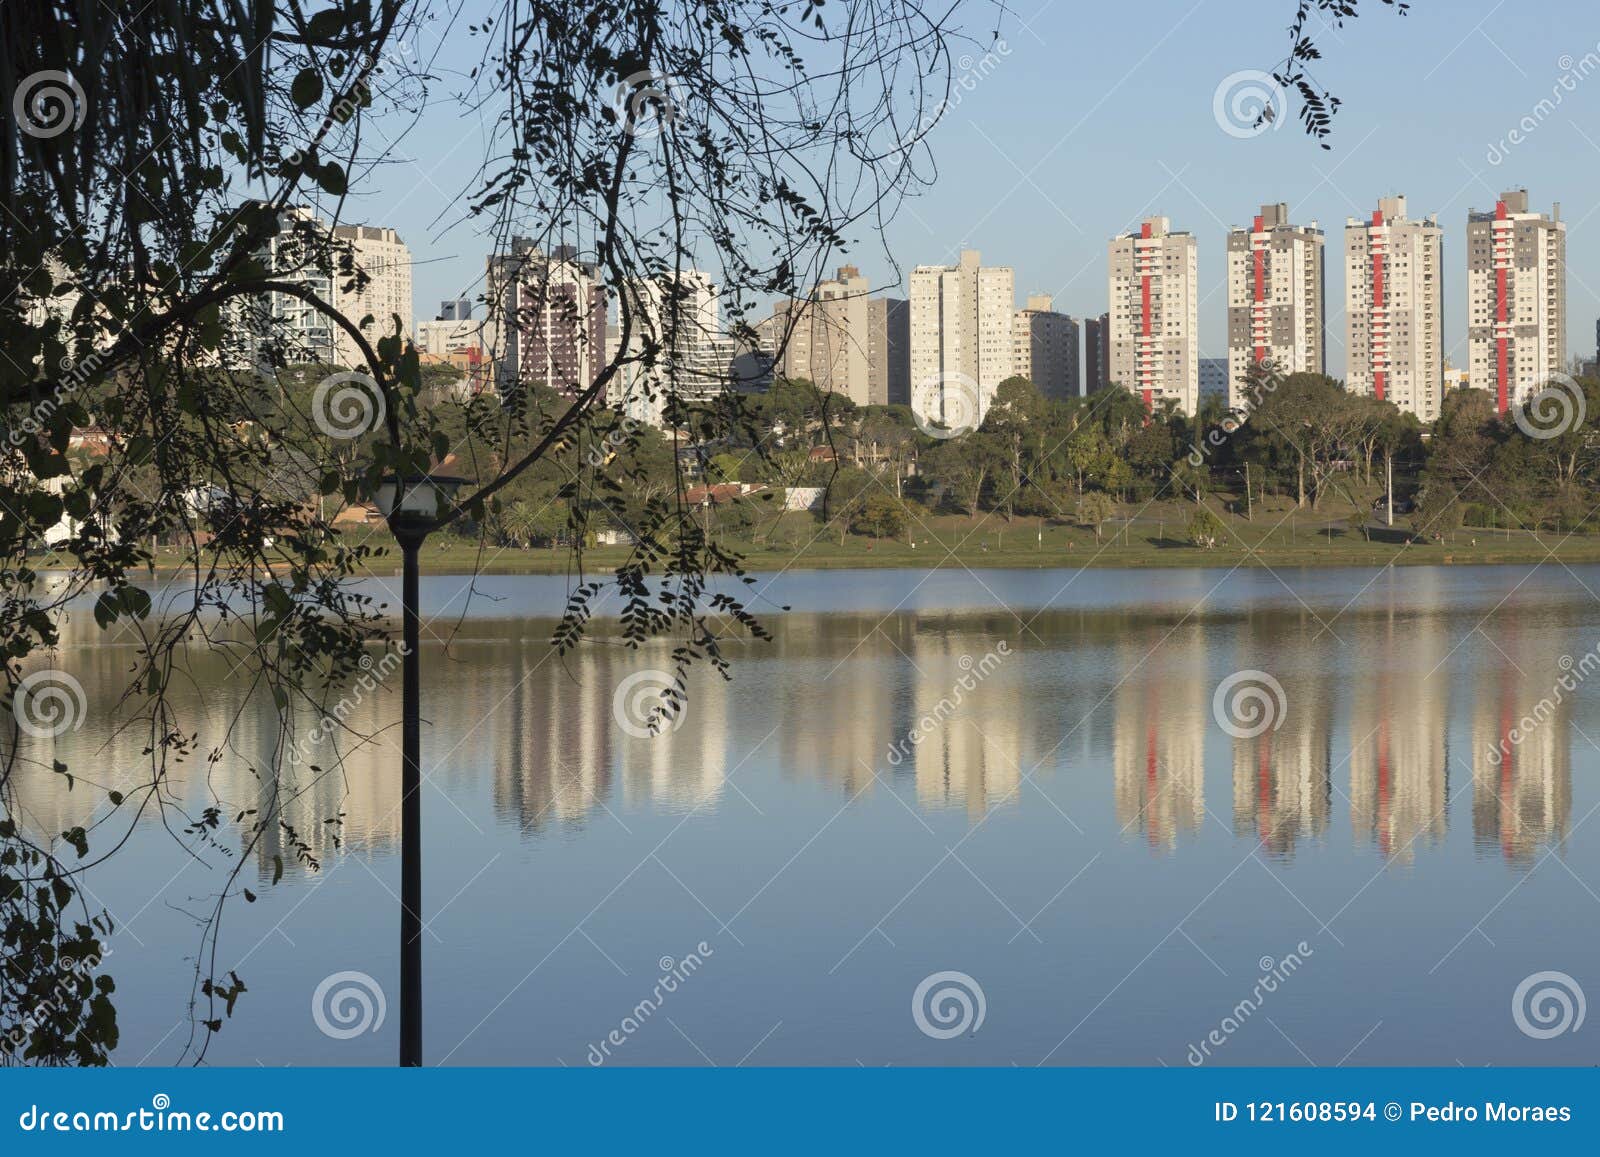 reflection of the buildings on the lake.